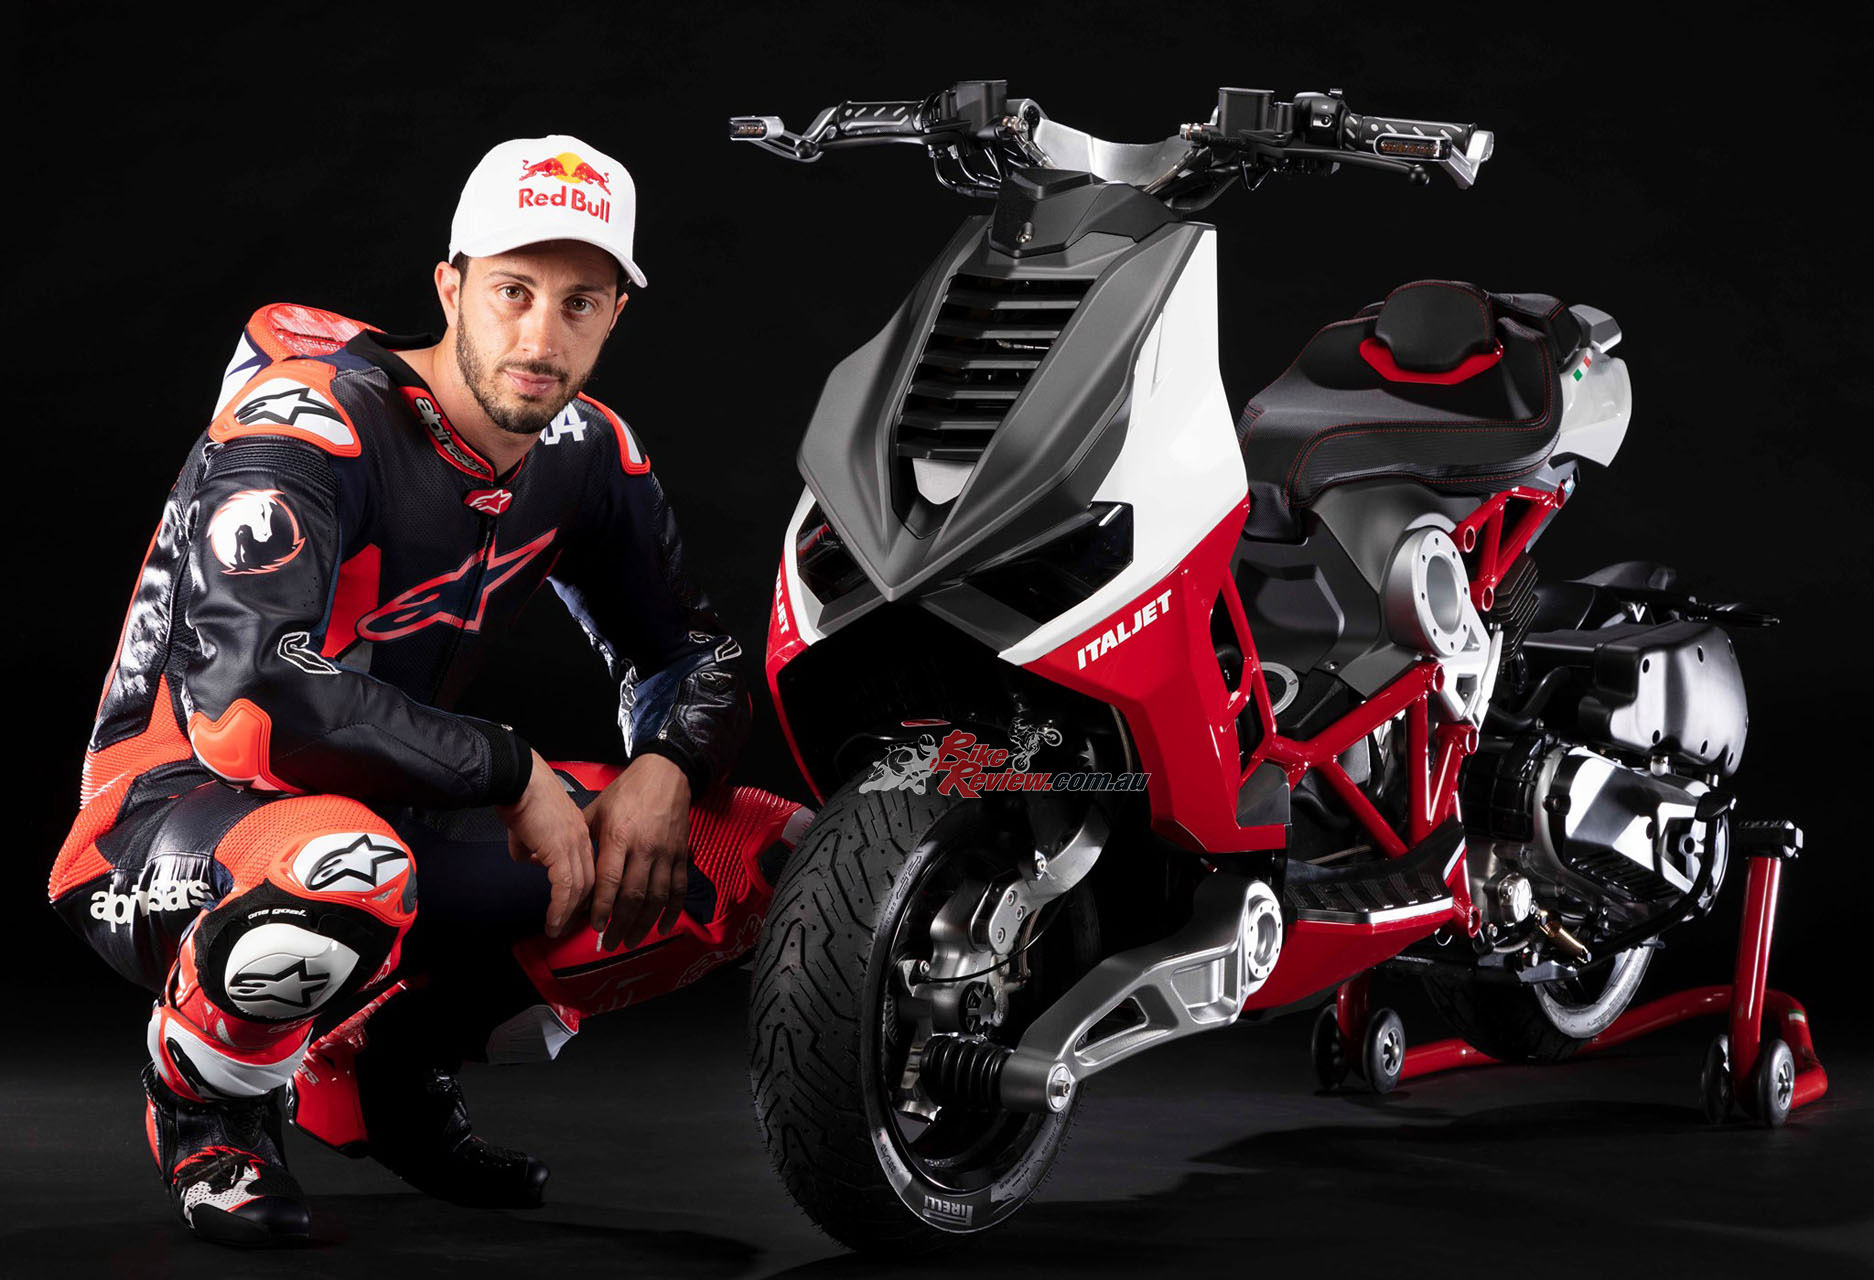 "A three-year period of refinement and collaborative input from Italian MotoGP rider and now brand ambassador Andrea Dovizioso"